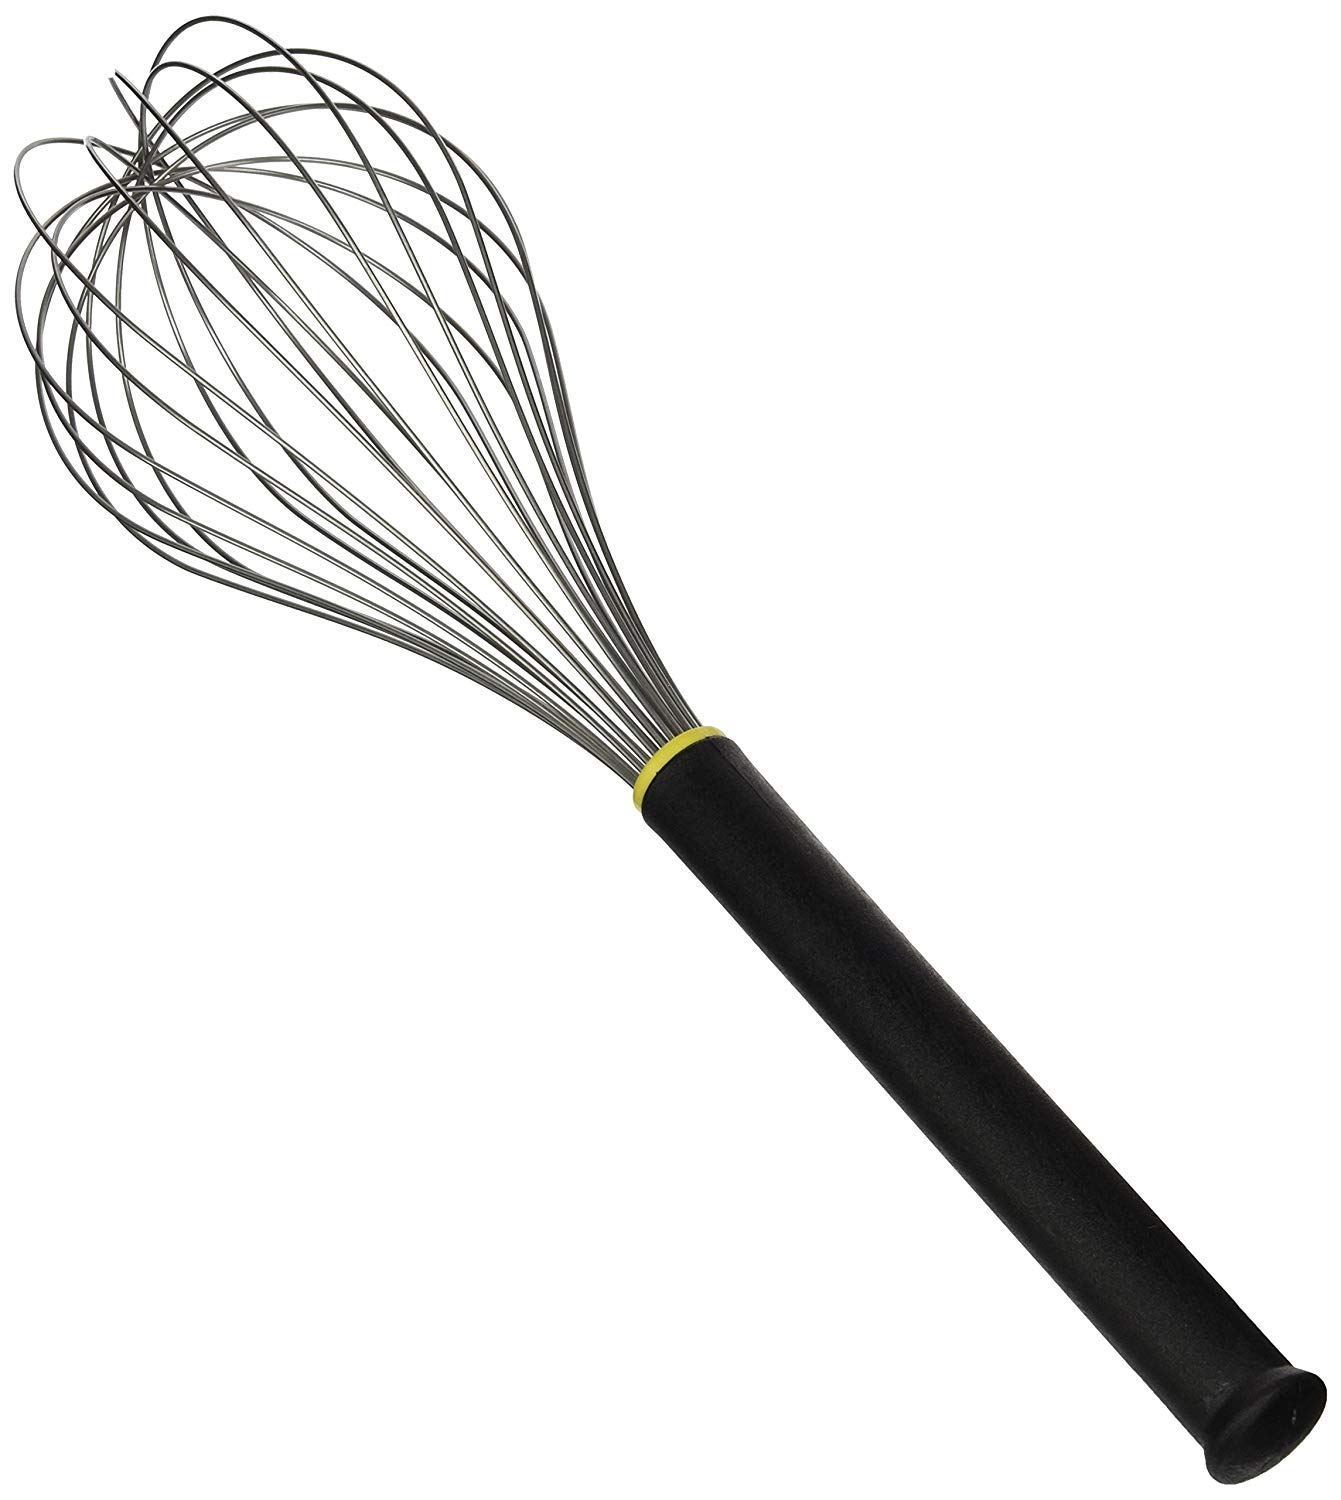 Whisk Drawing Free download on ClipArtMag